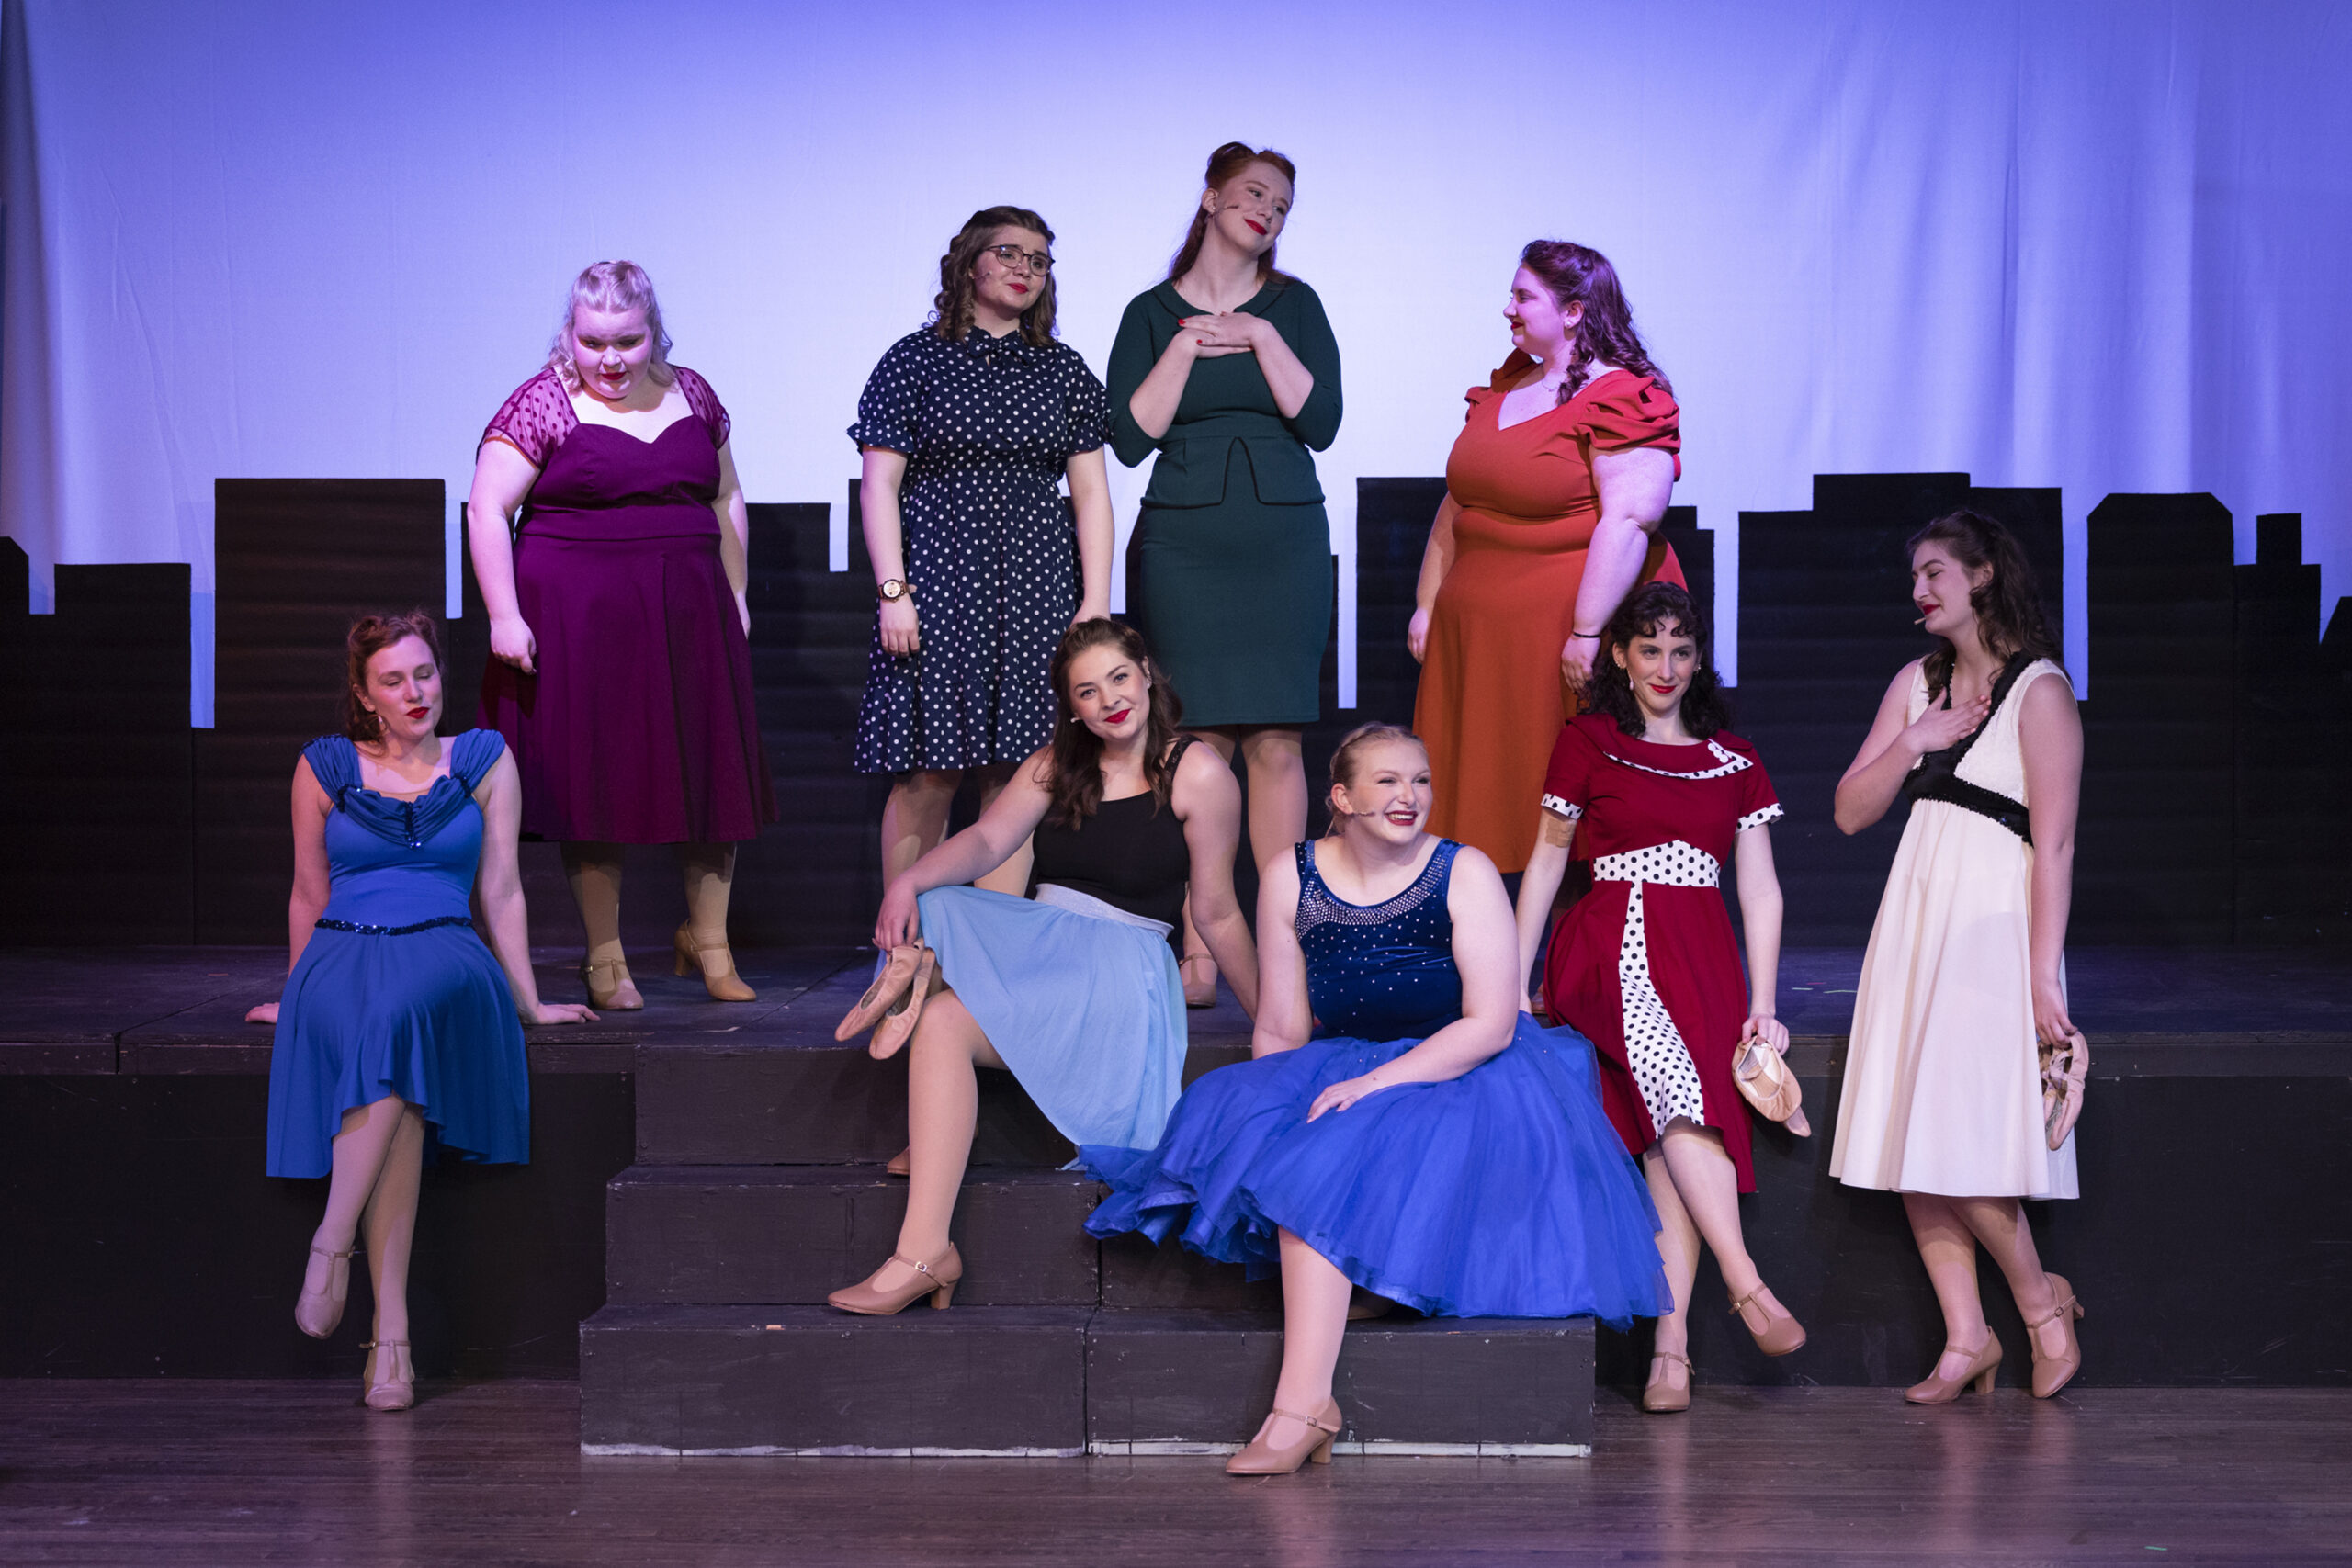 LVC Music Theater members perform on stage during preview of "On The Town"